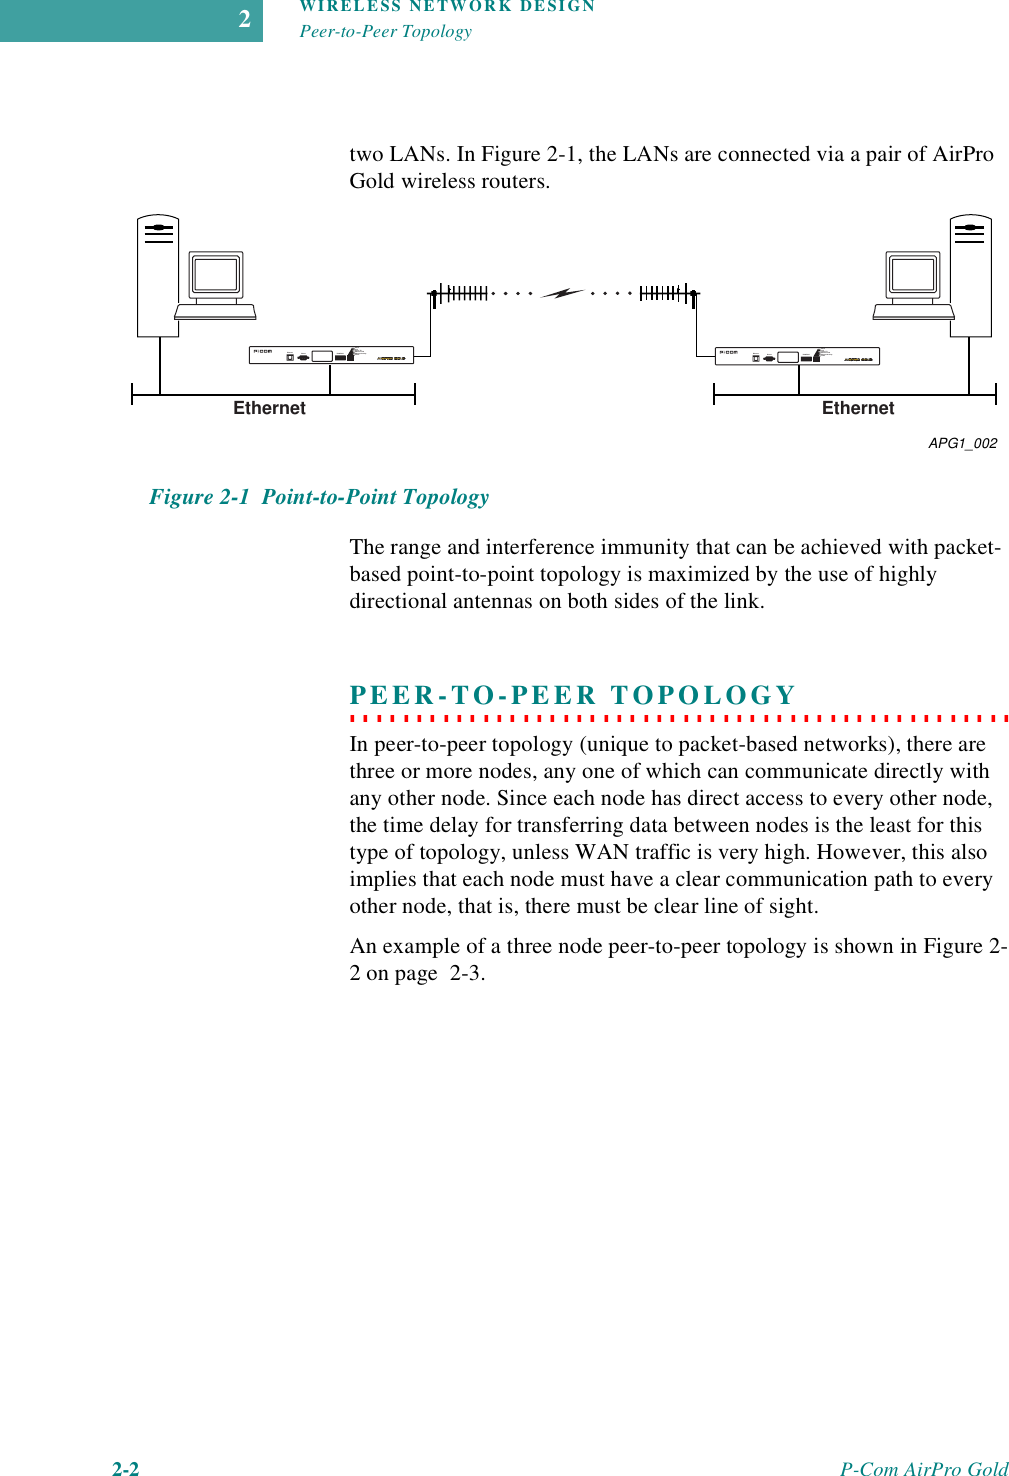 WIRELESS NETWORK DESIGNPeer-to-Peer Topology2-2 P-Com AirPro Gold2two LANs. In Figure 2-1, the LANs are connected via a pair of AirPro Gold wireless routers. Figure 2-1  Point-to-Point TopologyThe range and interference immunity that can be achieved with packet-based point-to-point topology is maximized by the use of highly directional antennas on both sides of the link.. . . . . . . . . . . . . . . . . . . . . . . . . . . . . . . . . . . . . . . . . . . . . . . . . . PEER-TO-PEER TOPOLOGY In peer-to-peer topology (unique to packet-based networks), there are three or more nodes, any one of which can communicate directly with any other node. Since each node has direct access to every other node, the time delay for transferring data between nodes is the least for this type of topology, unless WAN traffic is very high. However, this also implies that each node must have a clear communication path to every other node, that is, there must be clear line of sight. An example of a three node peer-to-peer topology is shown in Figure 2-2 on page  2-3.APG1_002Ethernet EthernetEthernet RS232 RSQ/RSSIAlarmLinkFrame TXEthernet LinkEthernet ActivityPower Ethernet RS232 RSQ/RSSIAlarmLinkFrame TXEthernet LinkEthernet ActivityPower